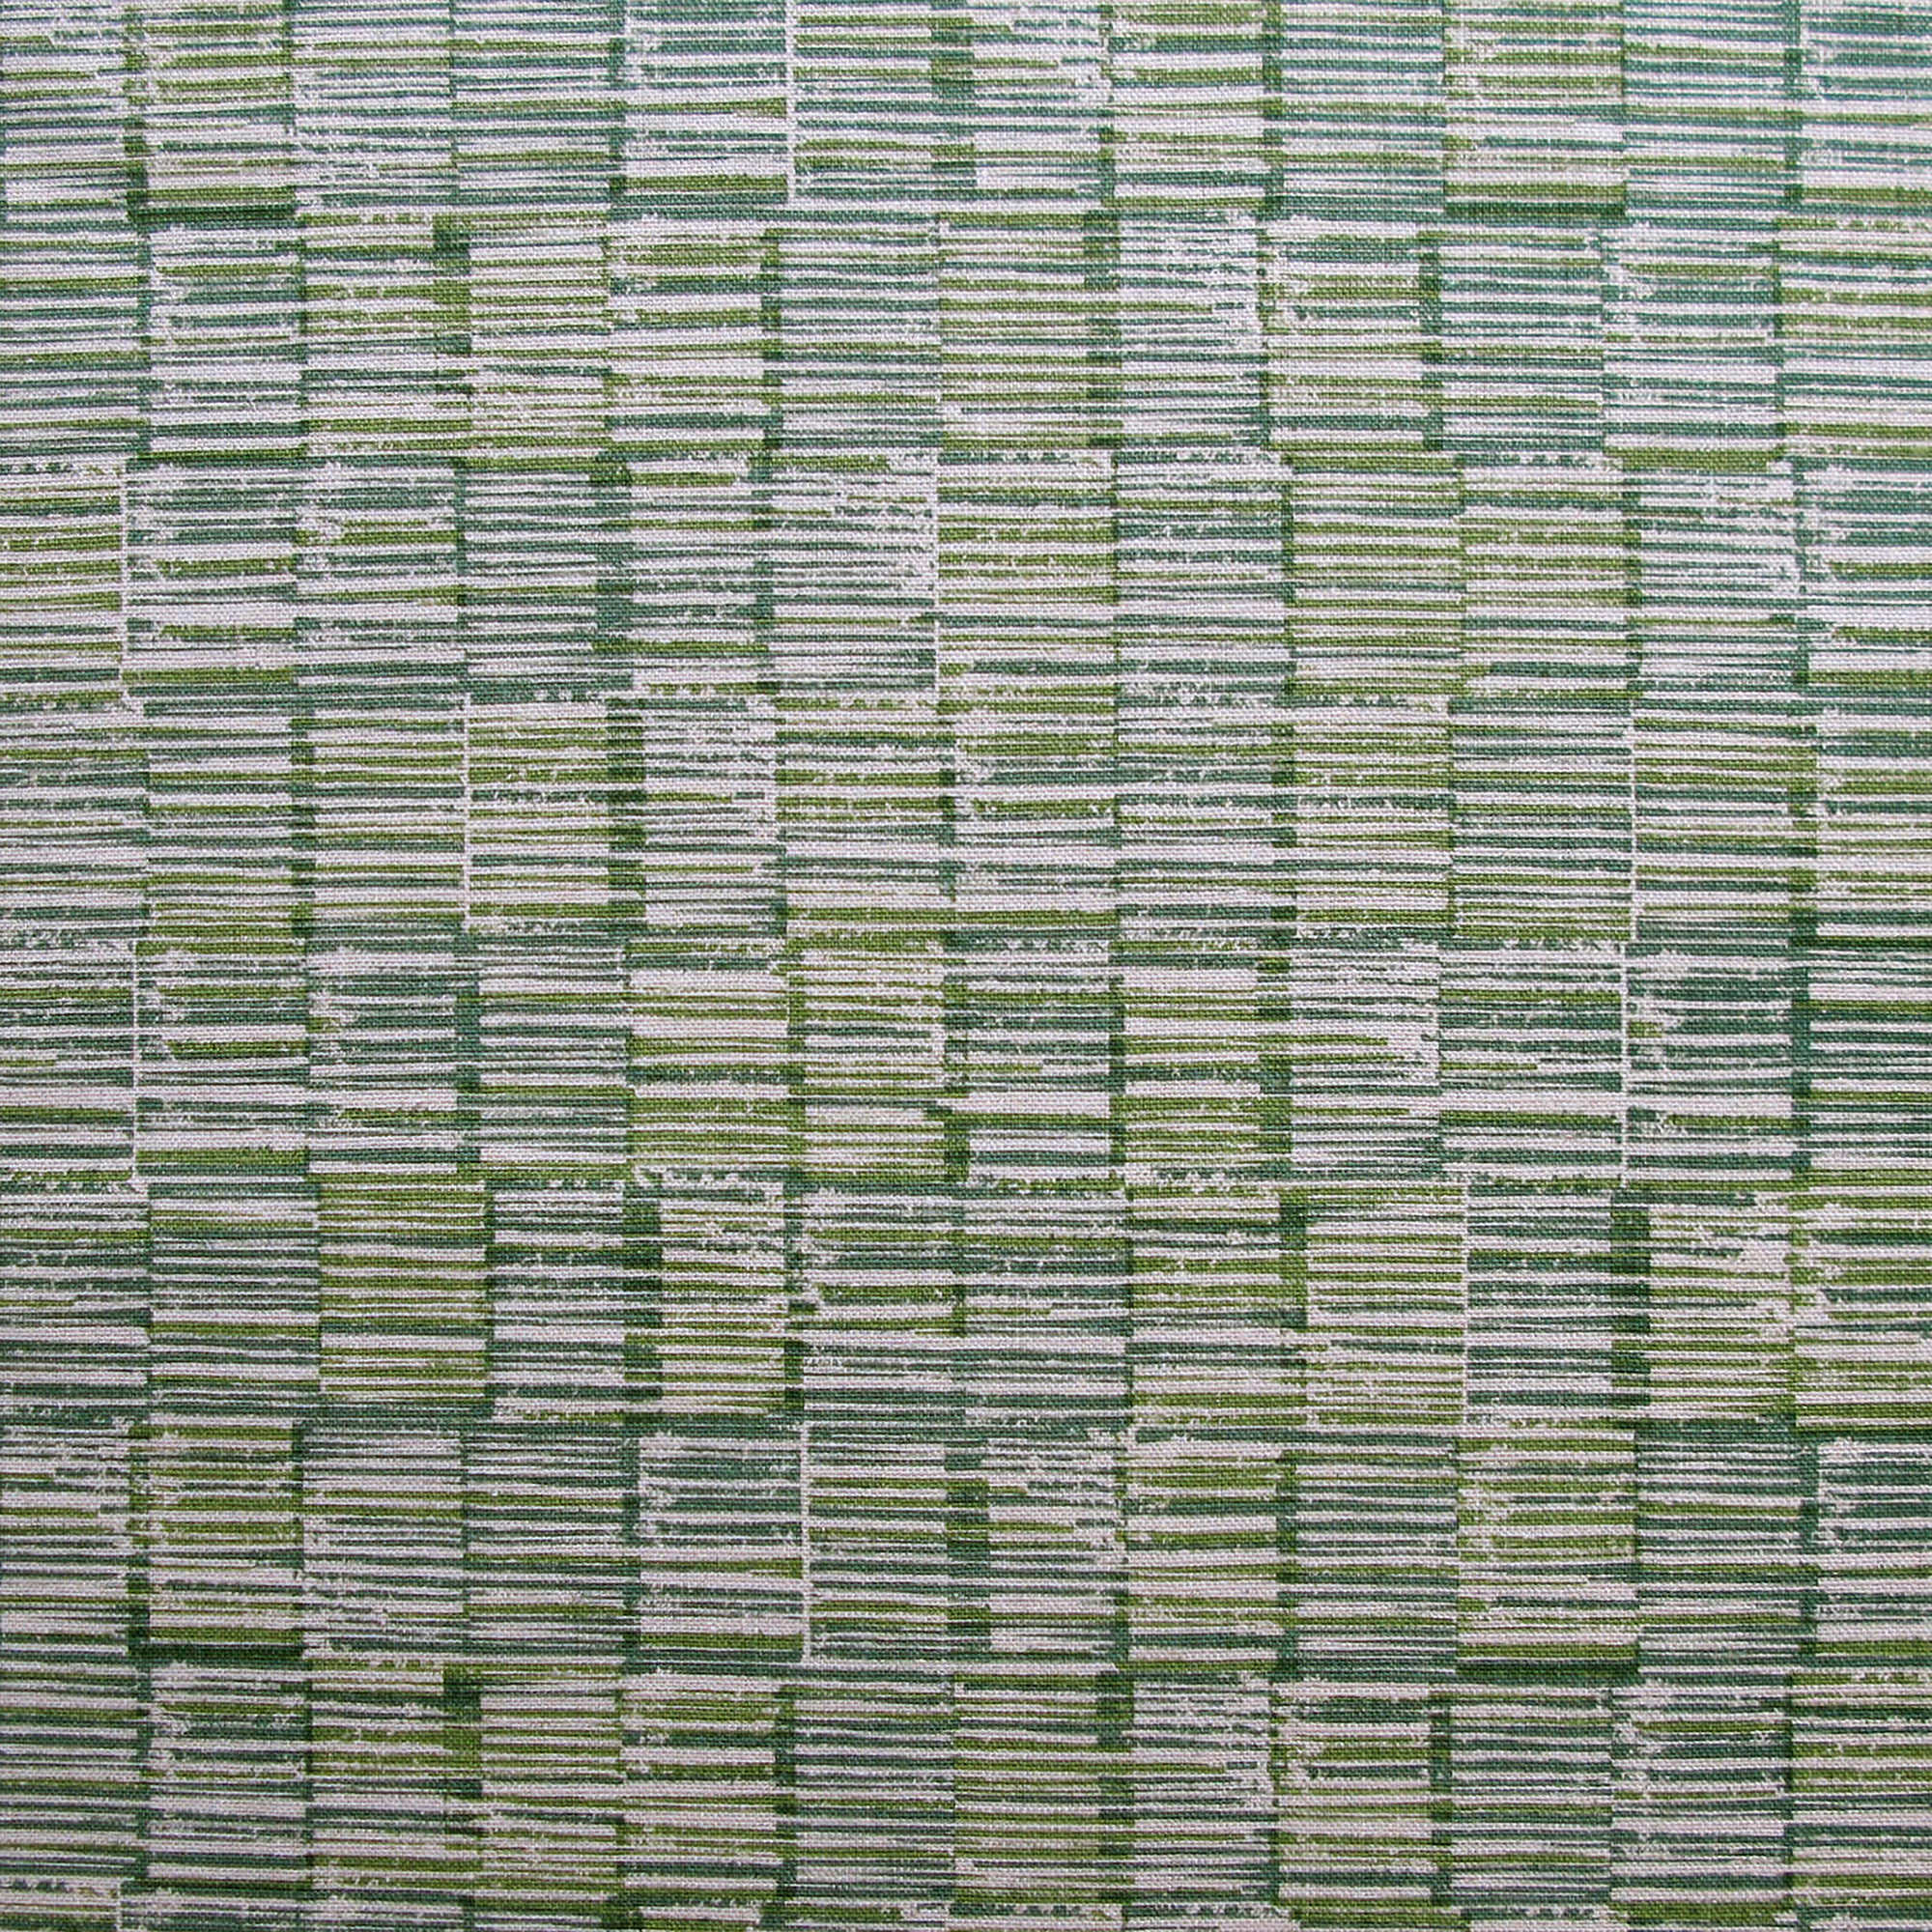 Detail of fabric in a textural grid print in blue and green on a light gray field.